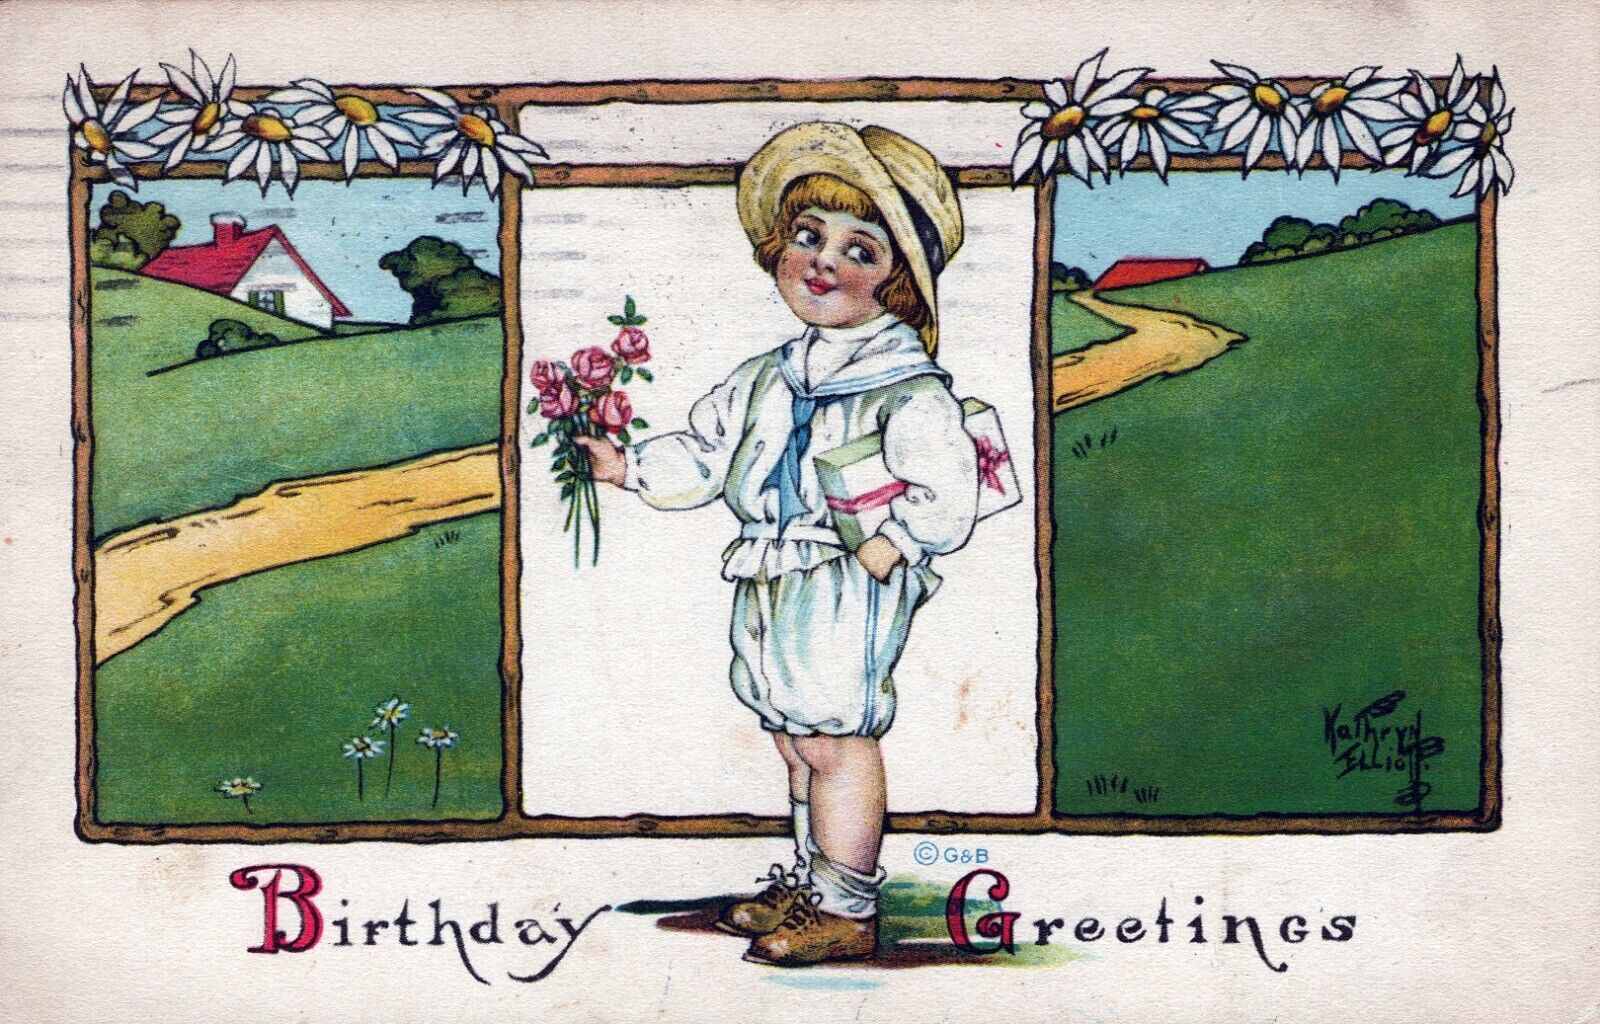 A Girl Ready For Birthday Party. Posted in 1916 Birthday Greetings Postcard